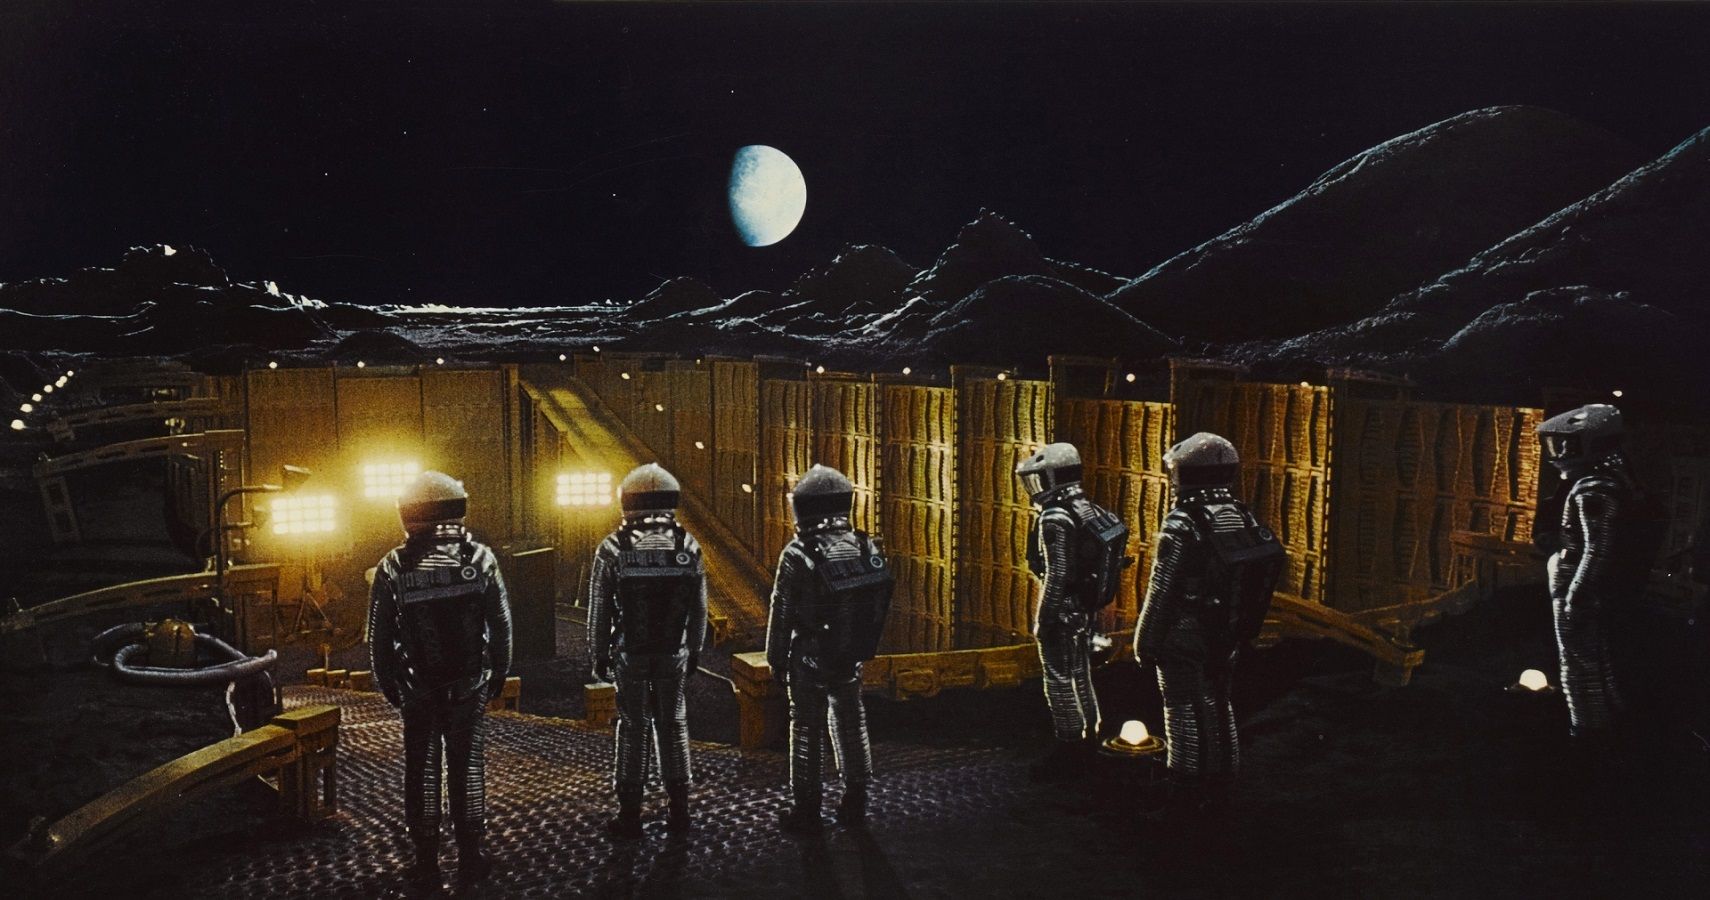 10 Behind-The-Scenes Facts About The Making Of 2001: A Space Odyssey